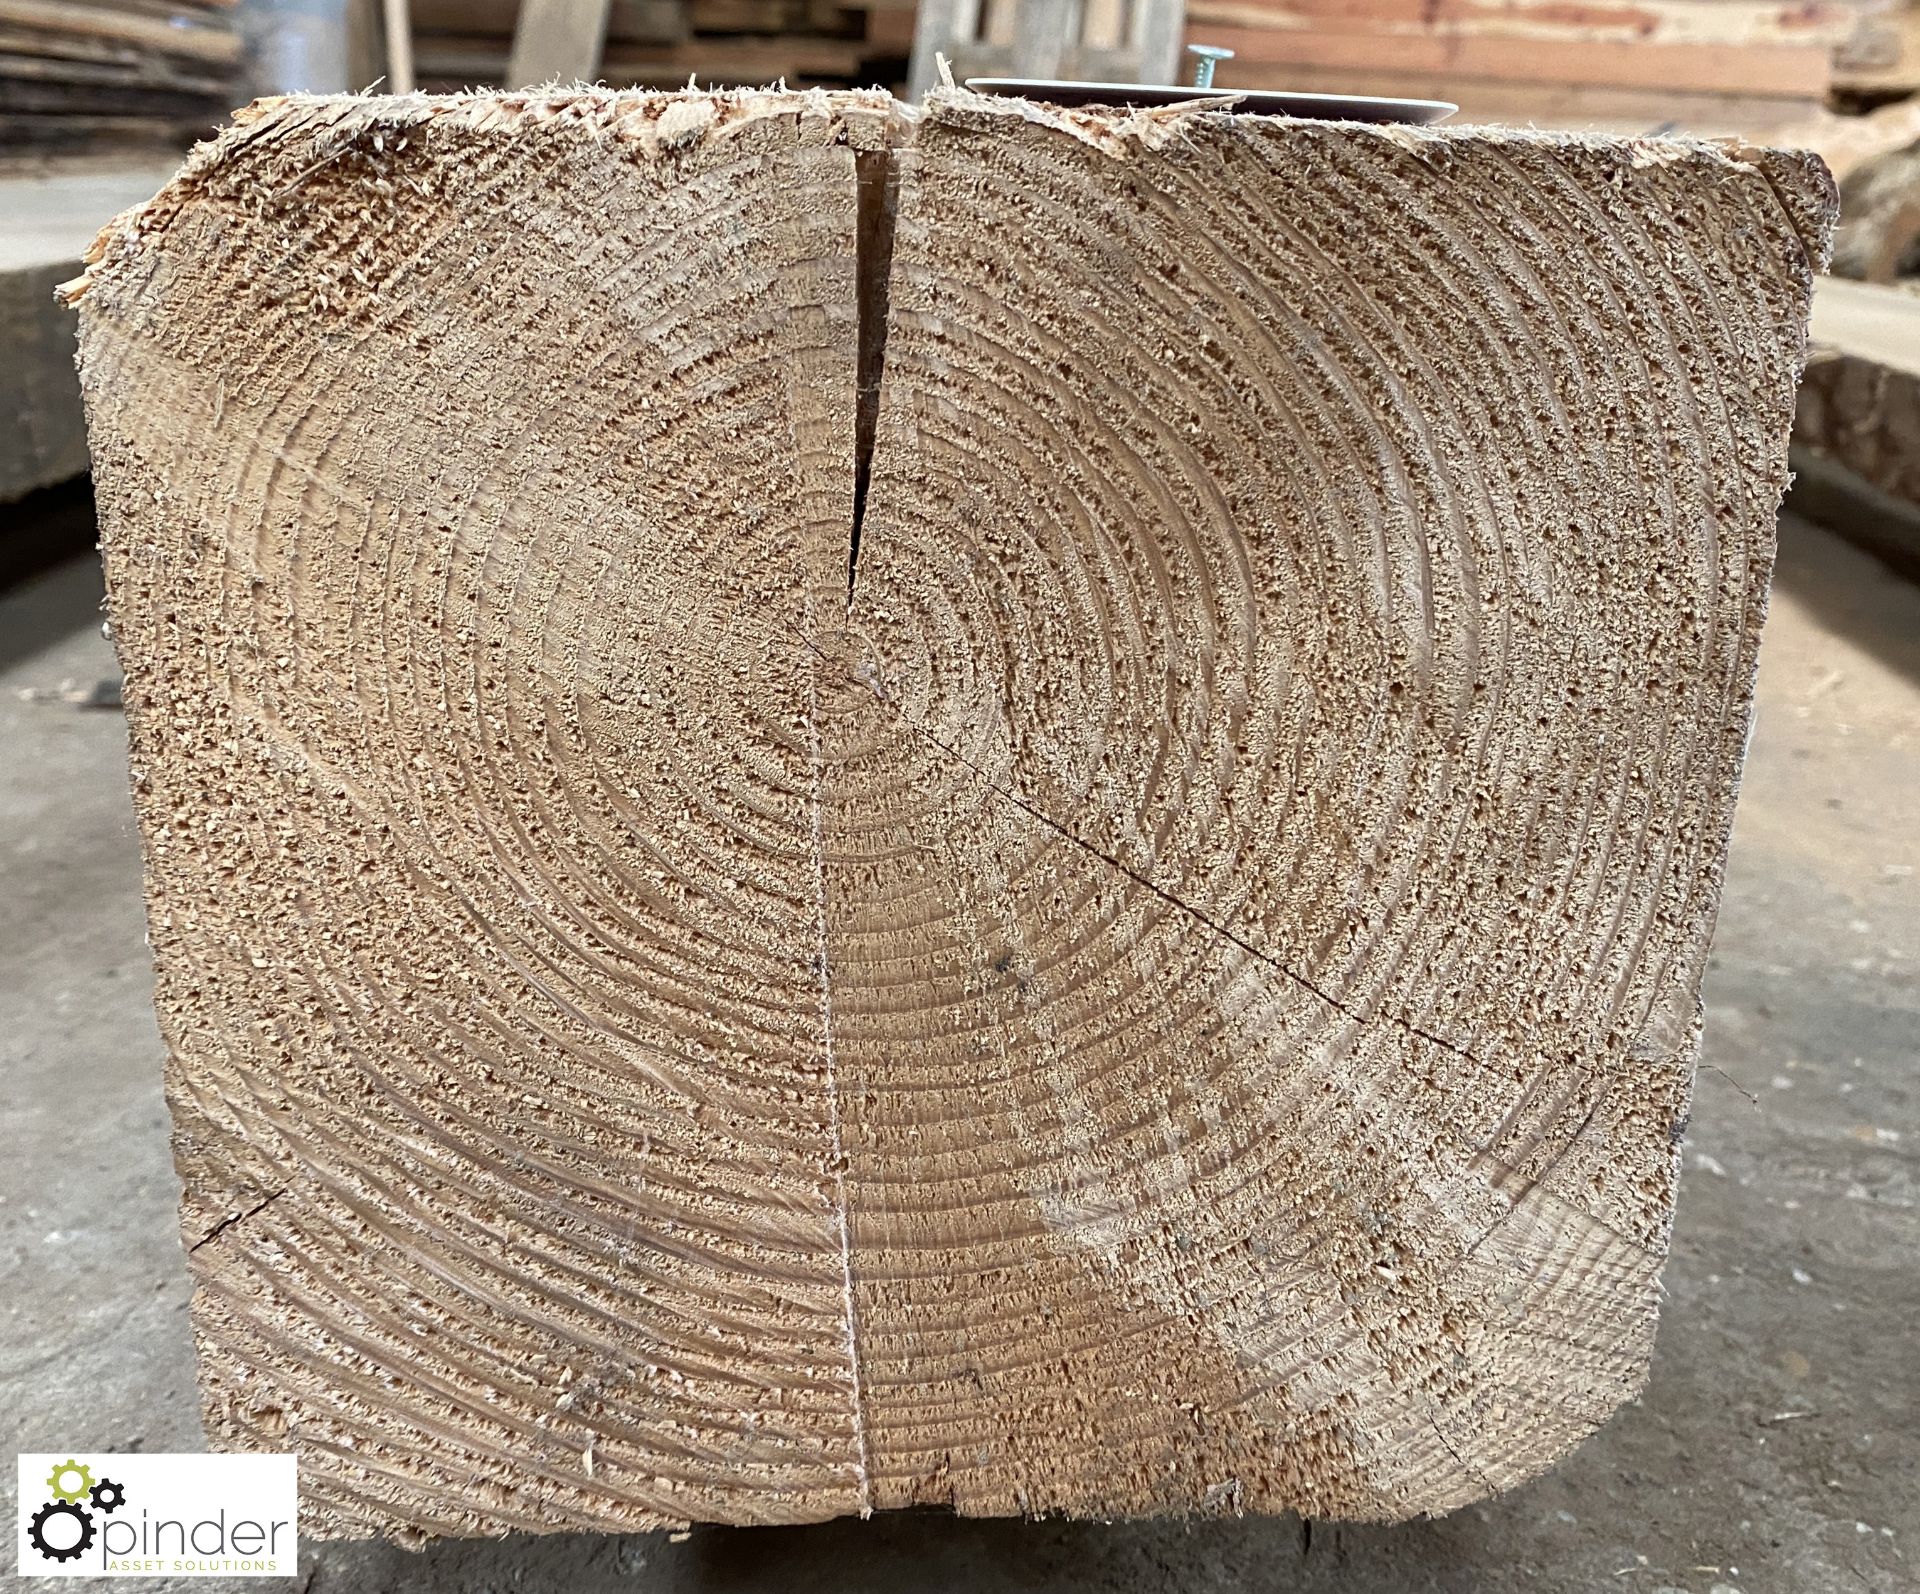 Air dried Pine Beam, 3720mm x 220mm x 200mm - Image 3 of 8